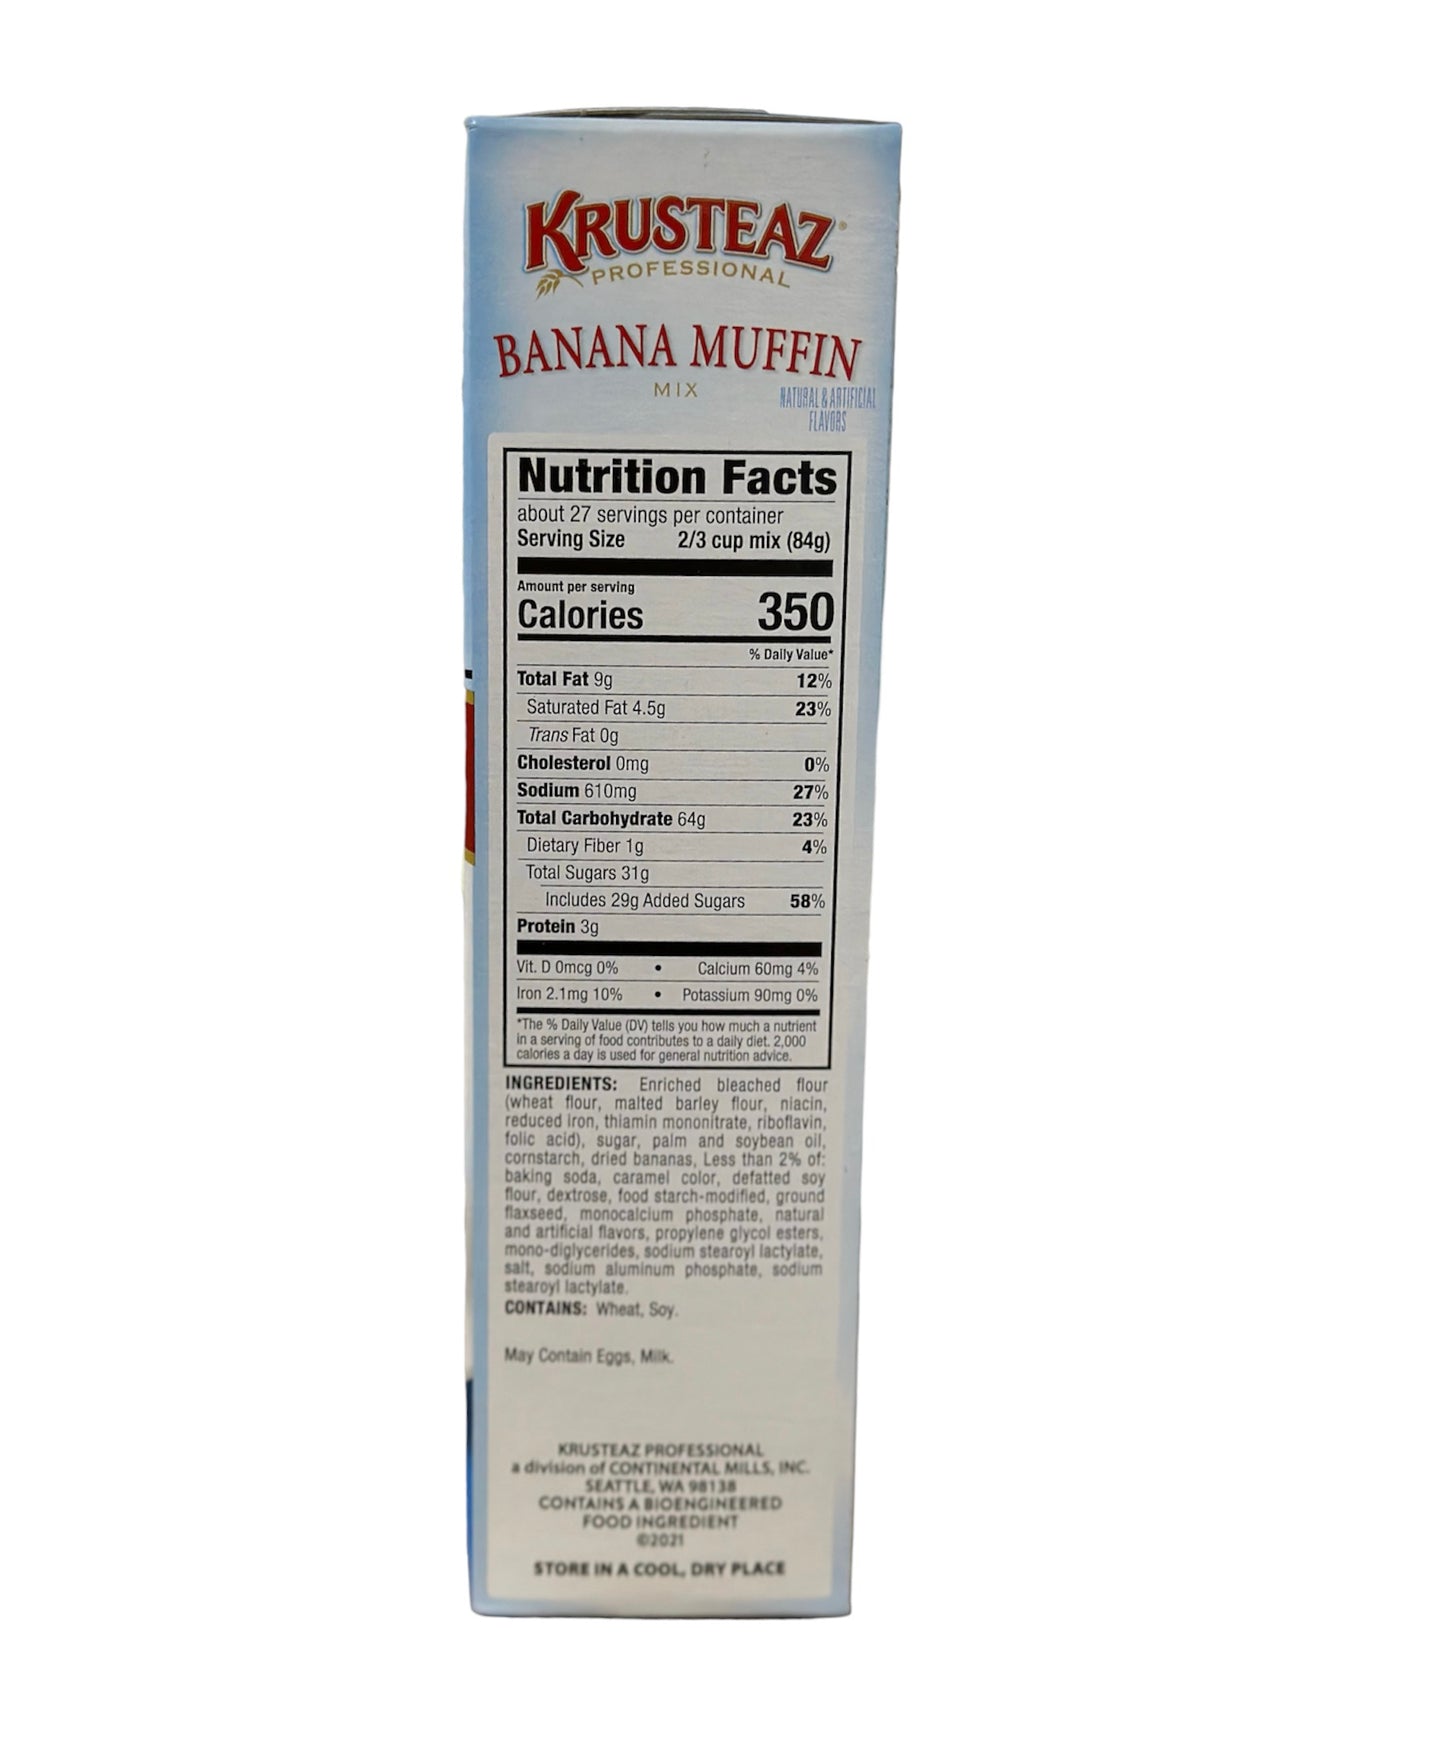 Krusteaz Professional Banana Muffin Mix (SPECIAL ORDER)